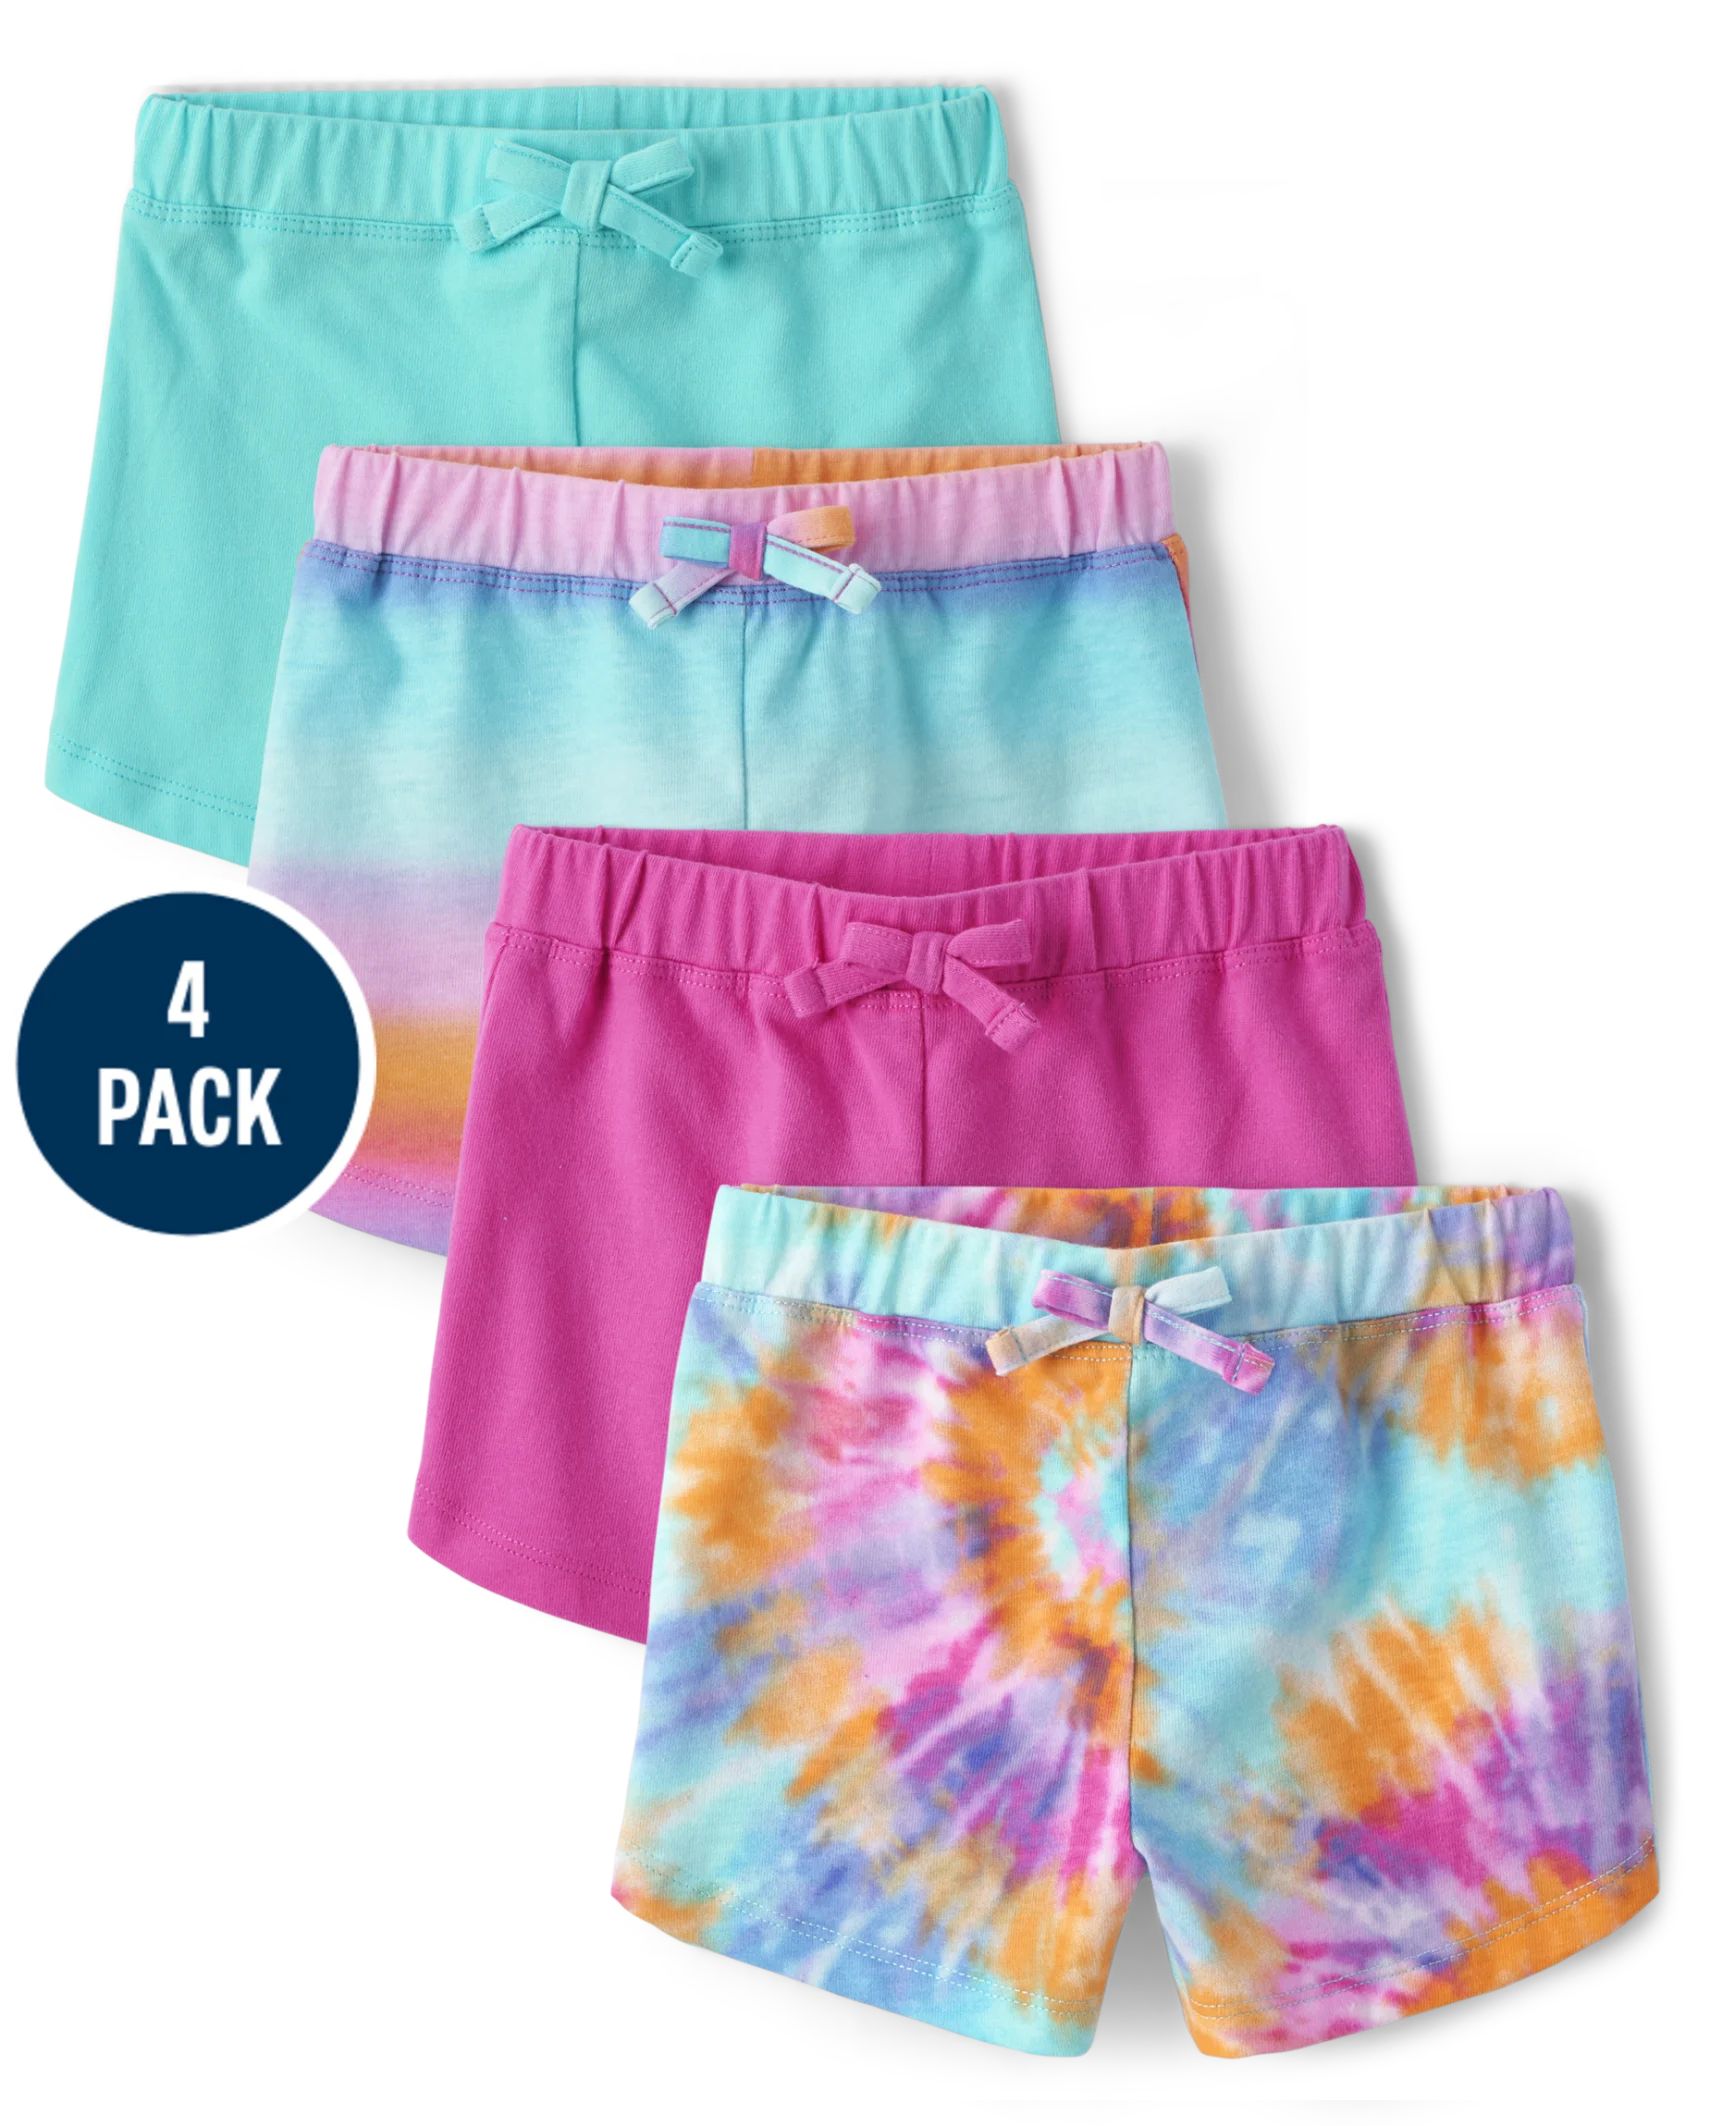 Toddler Girls Tie Dye Dolphin Shorts 4-Pack - blue radiance | The Children's Place